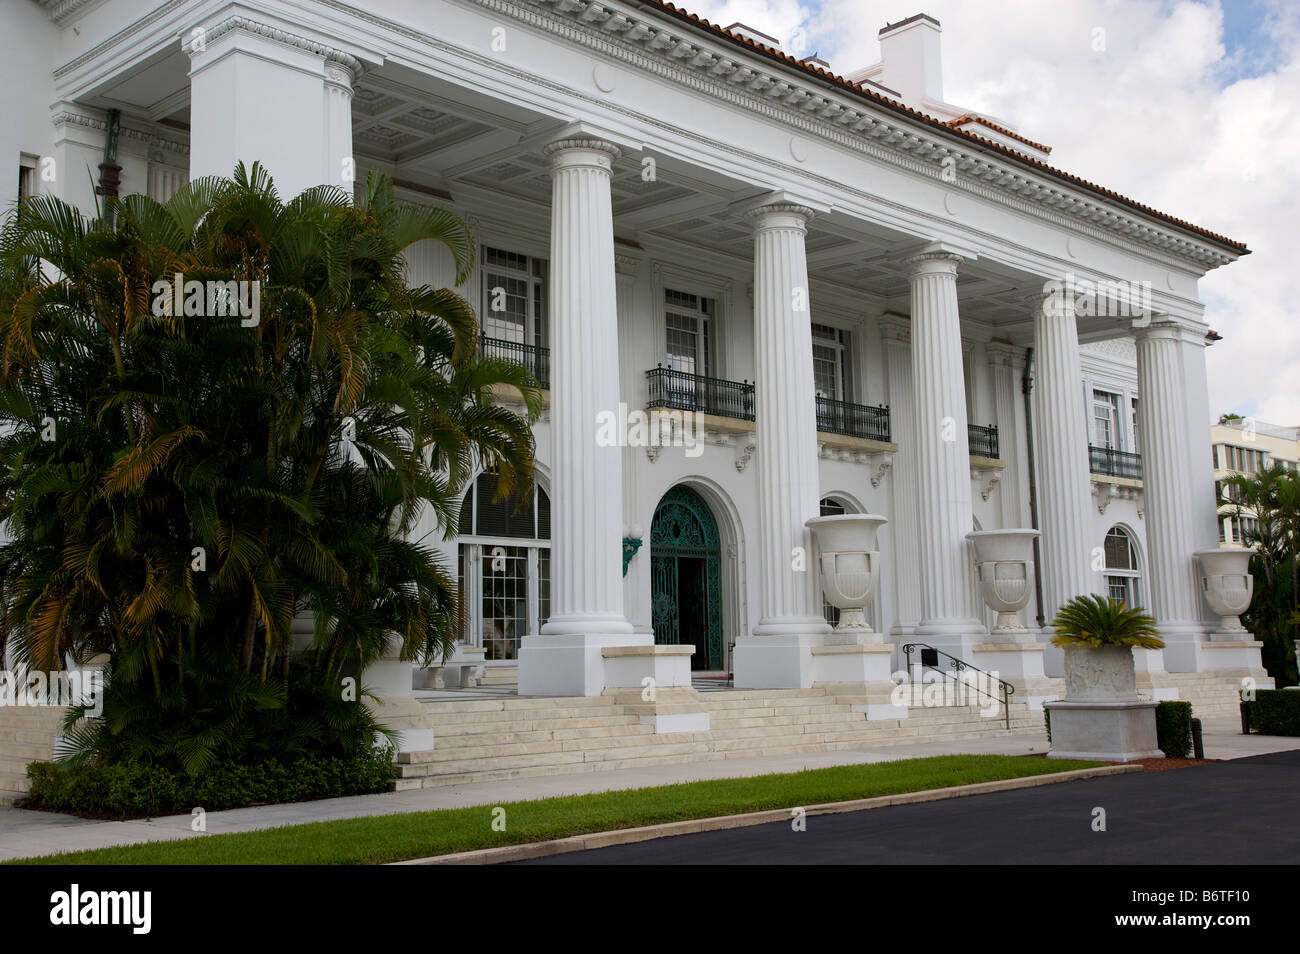 The Henry Flagler House Museum in Palm Beach Florida The Fifty five room Beaux Arts estate known as Whitehall. Stock Photo